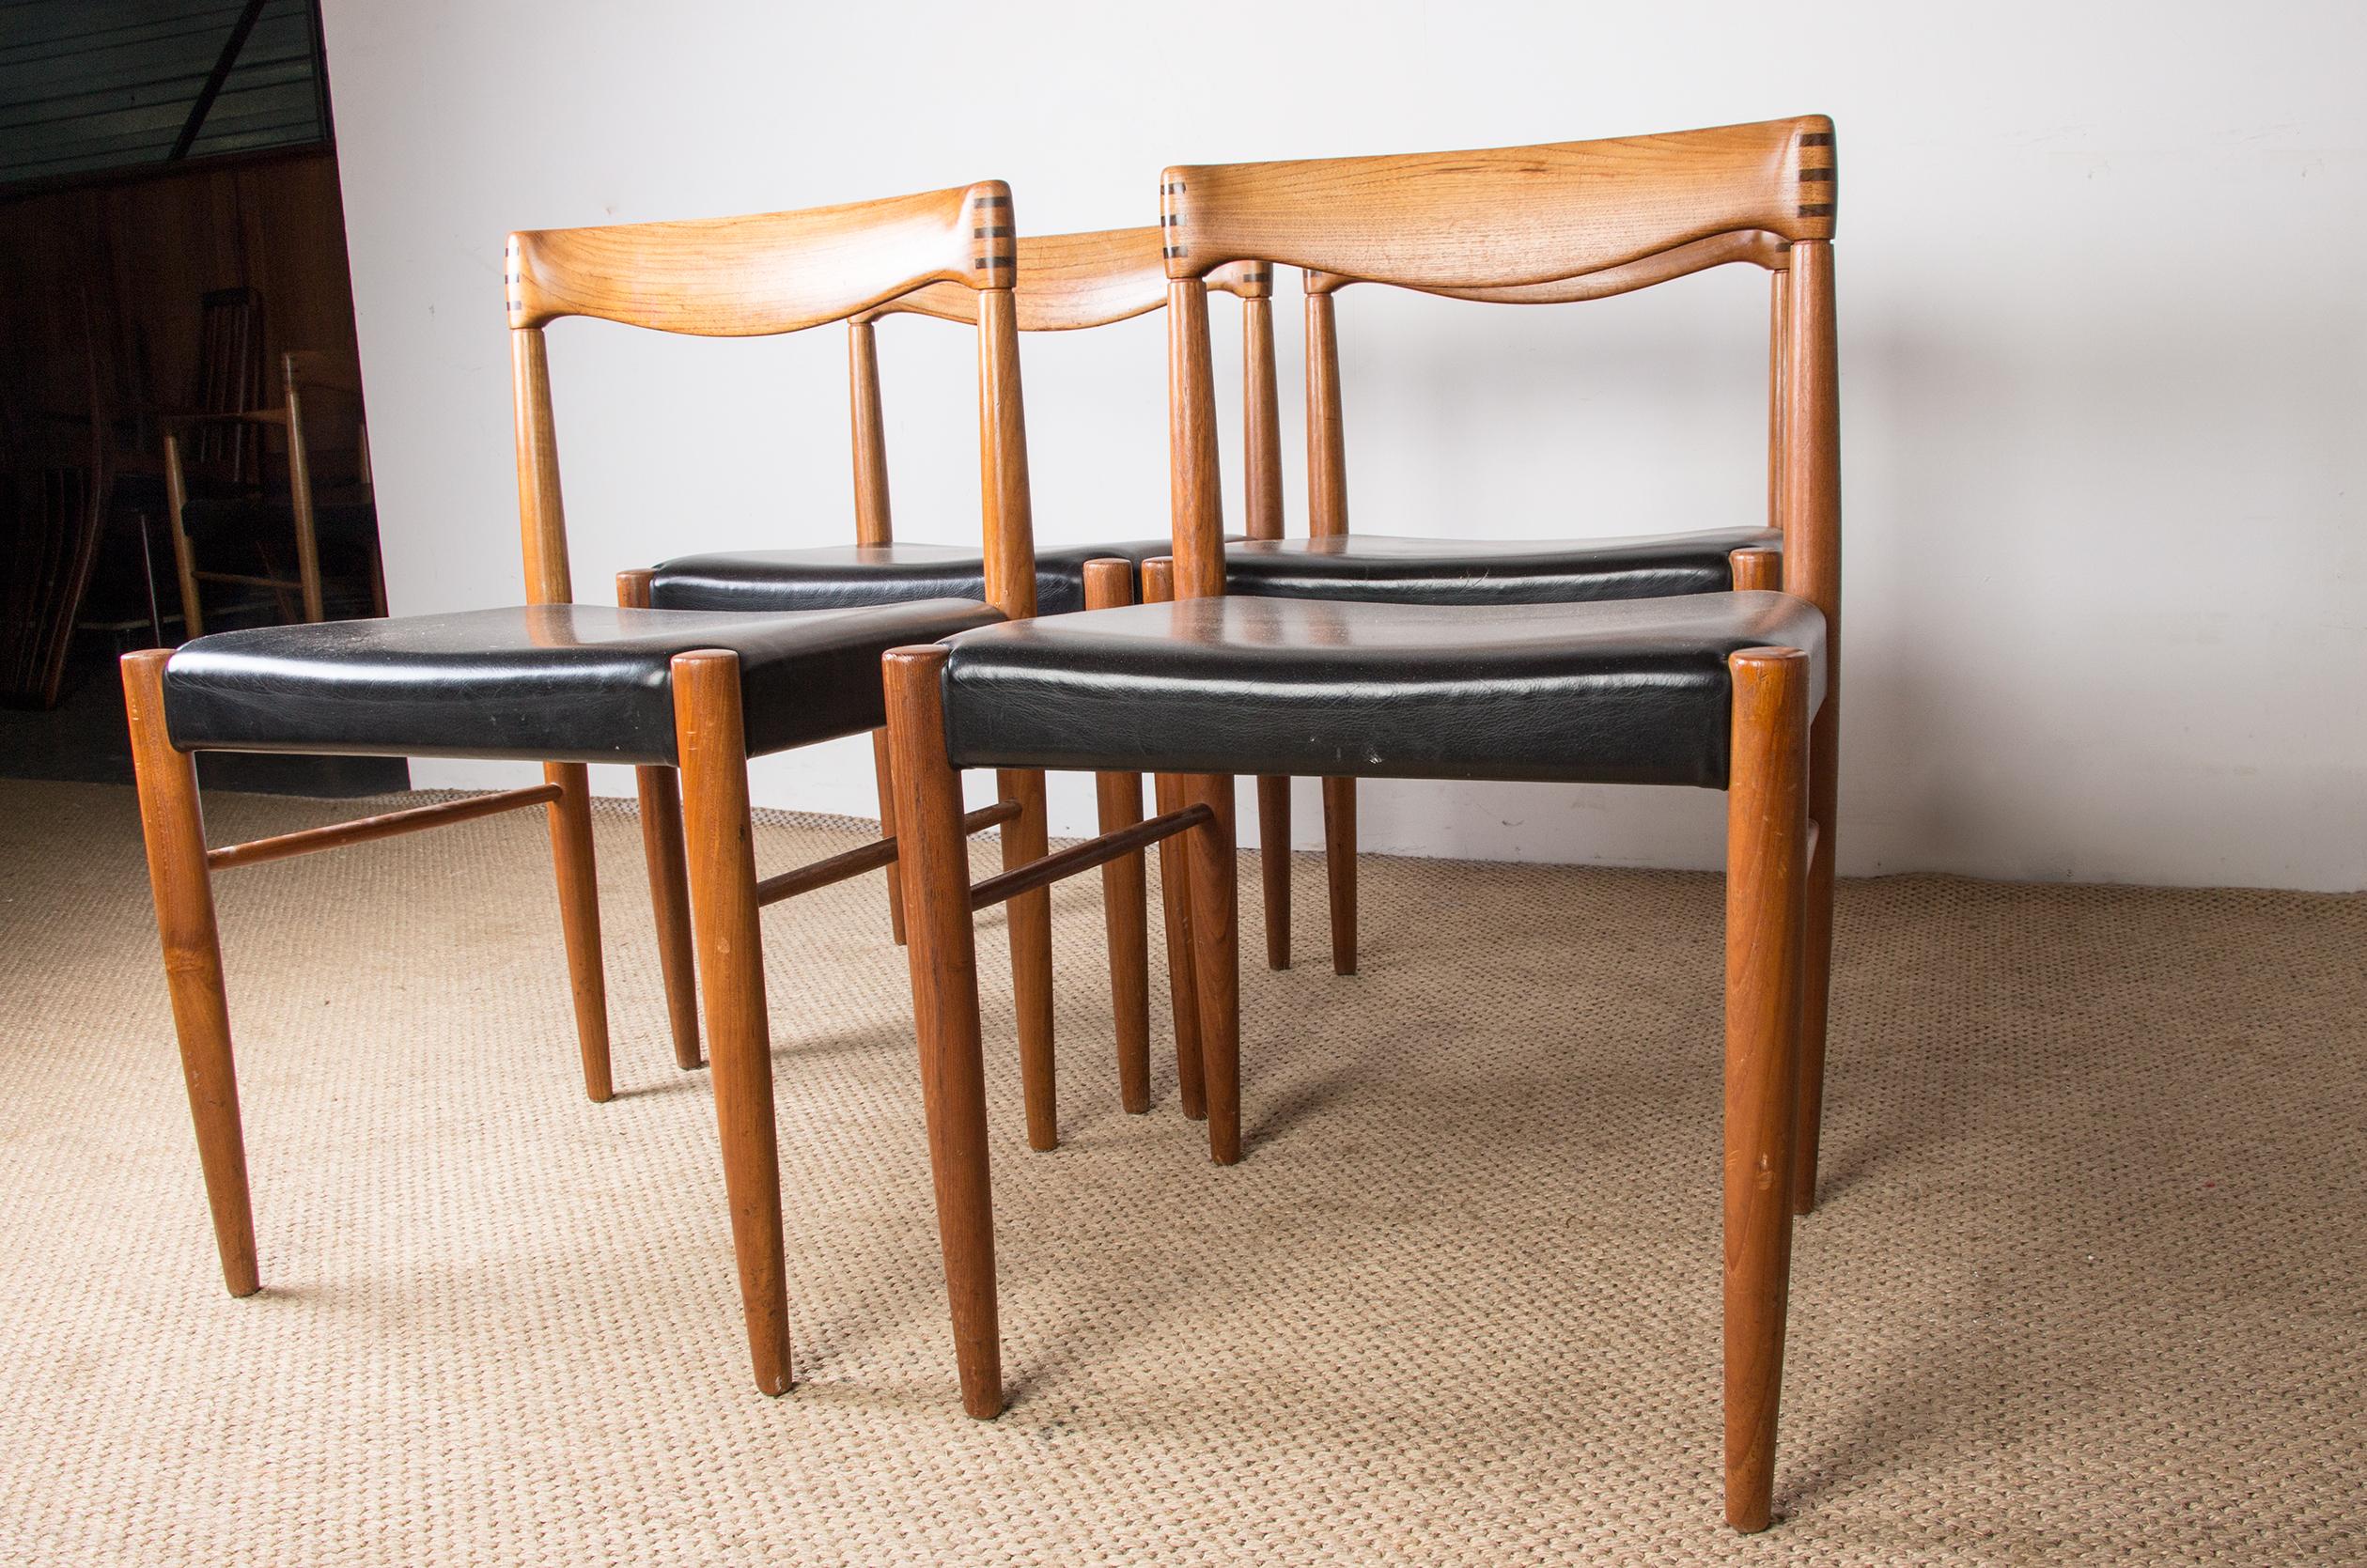 Series of 4 Danish Chairs in Oak and Black Leatherette by Henry Walter Klein for 11